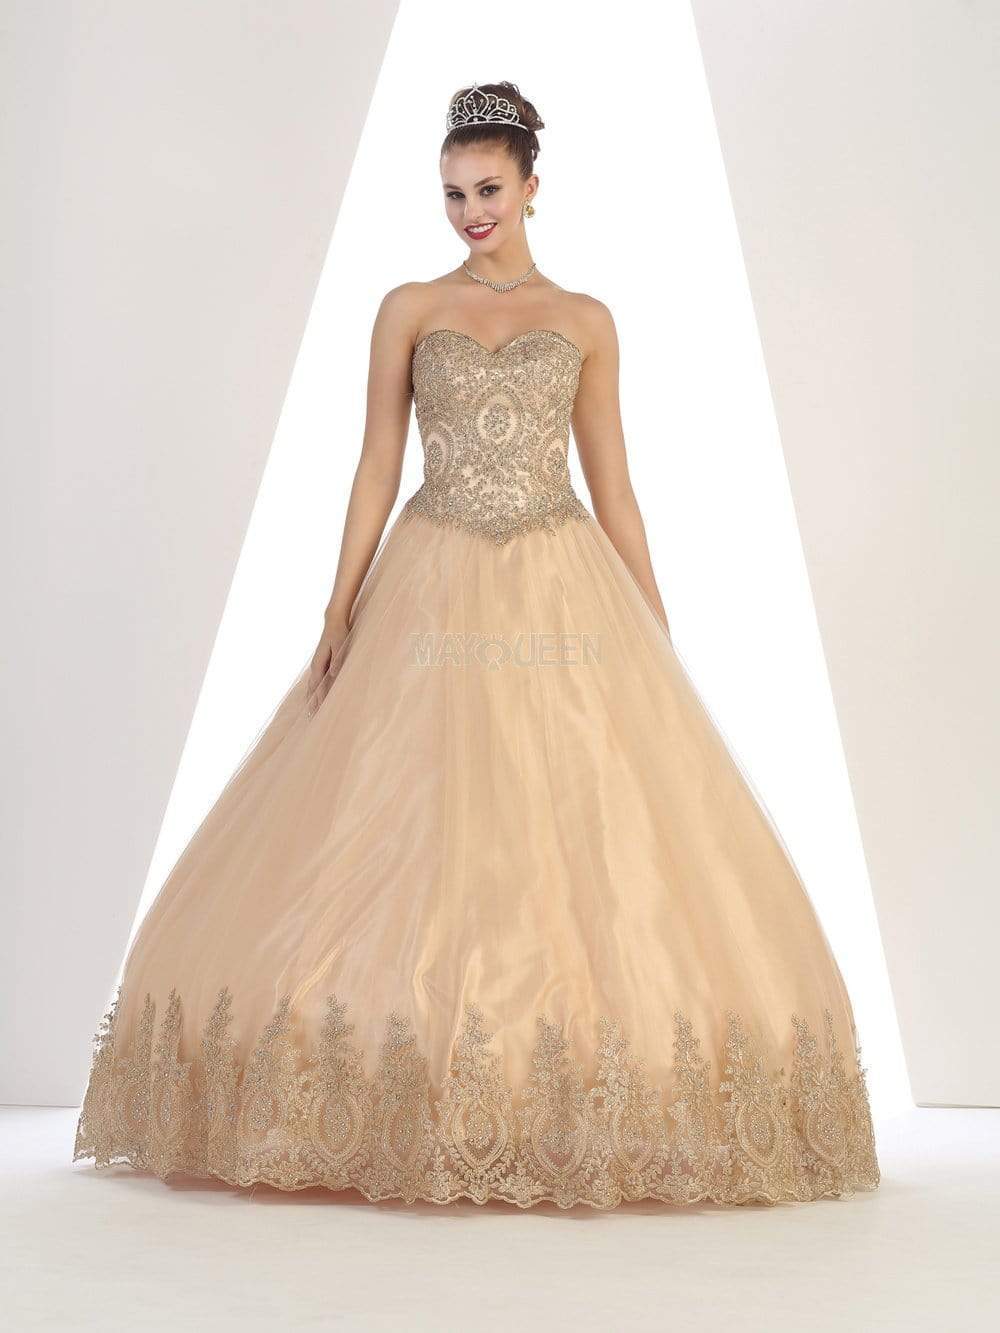 Image of May Queen - LK73 Strapless Sweetheart Gold Lace Embellished Ballgown